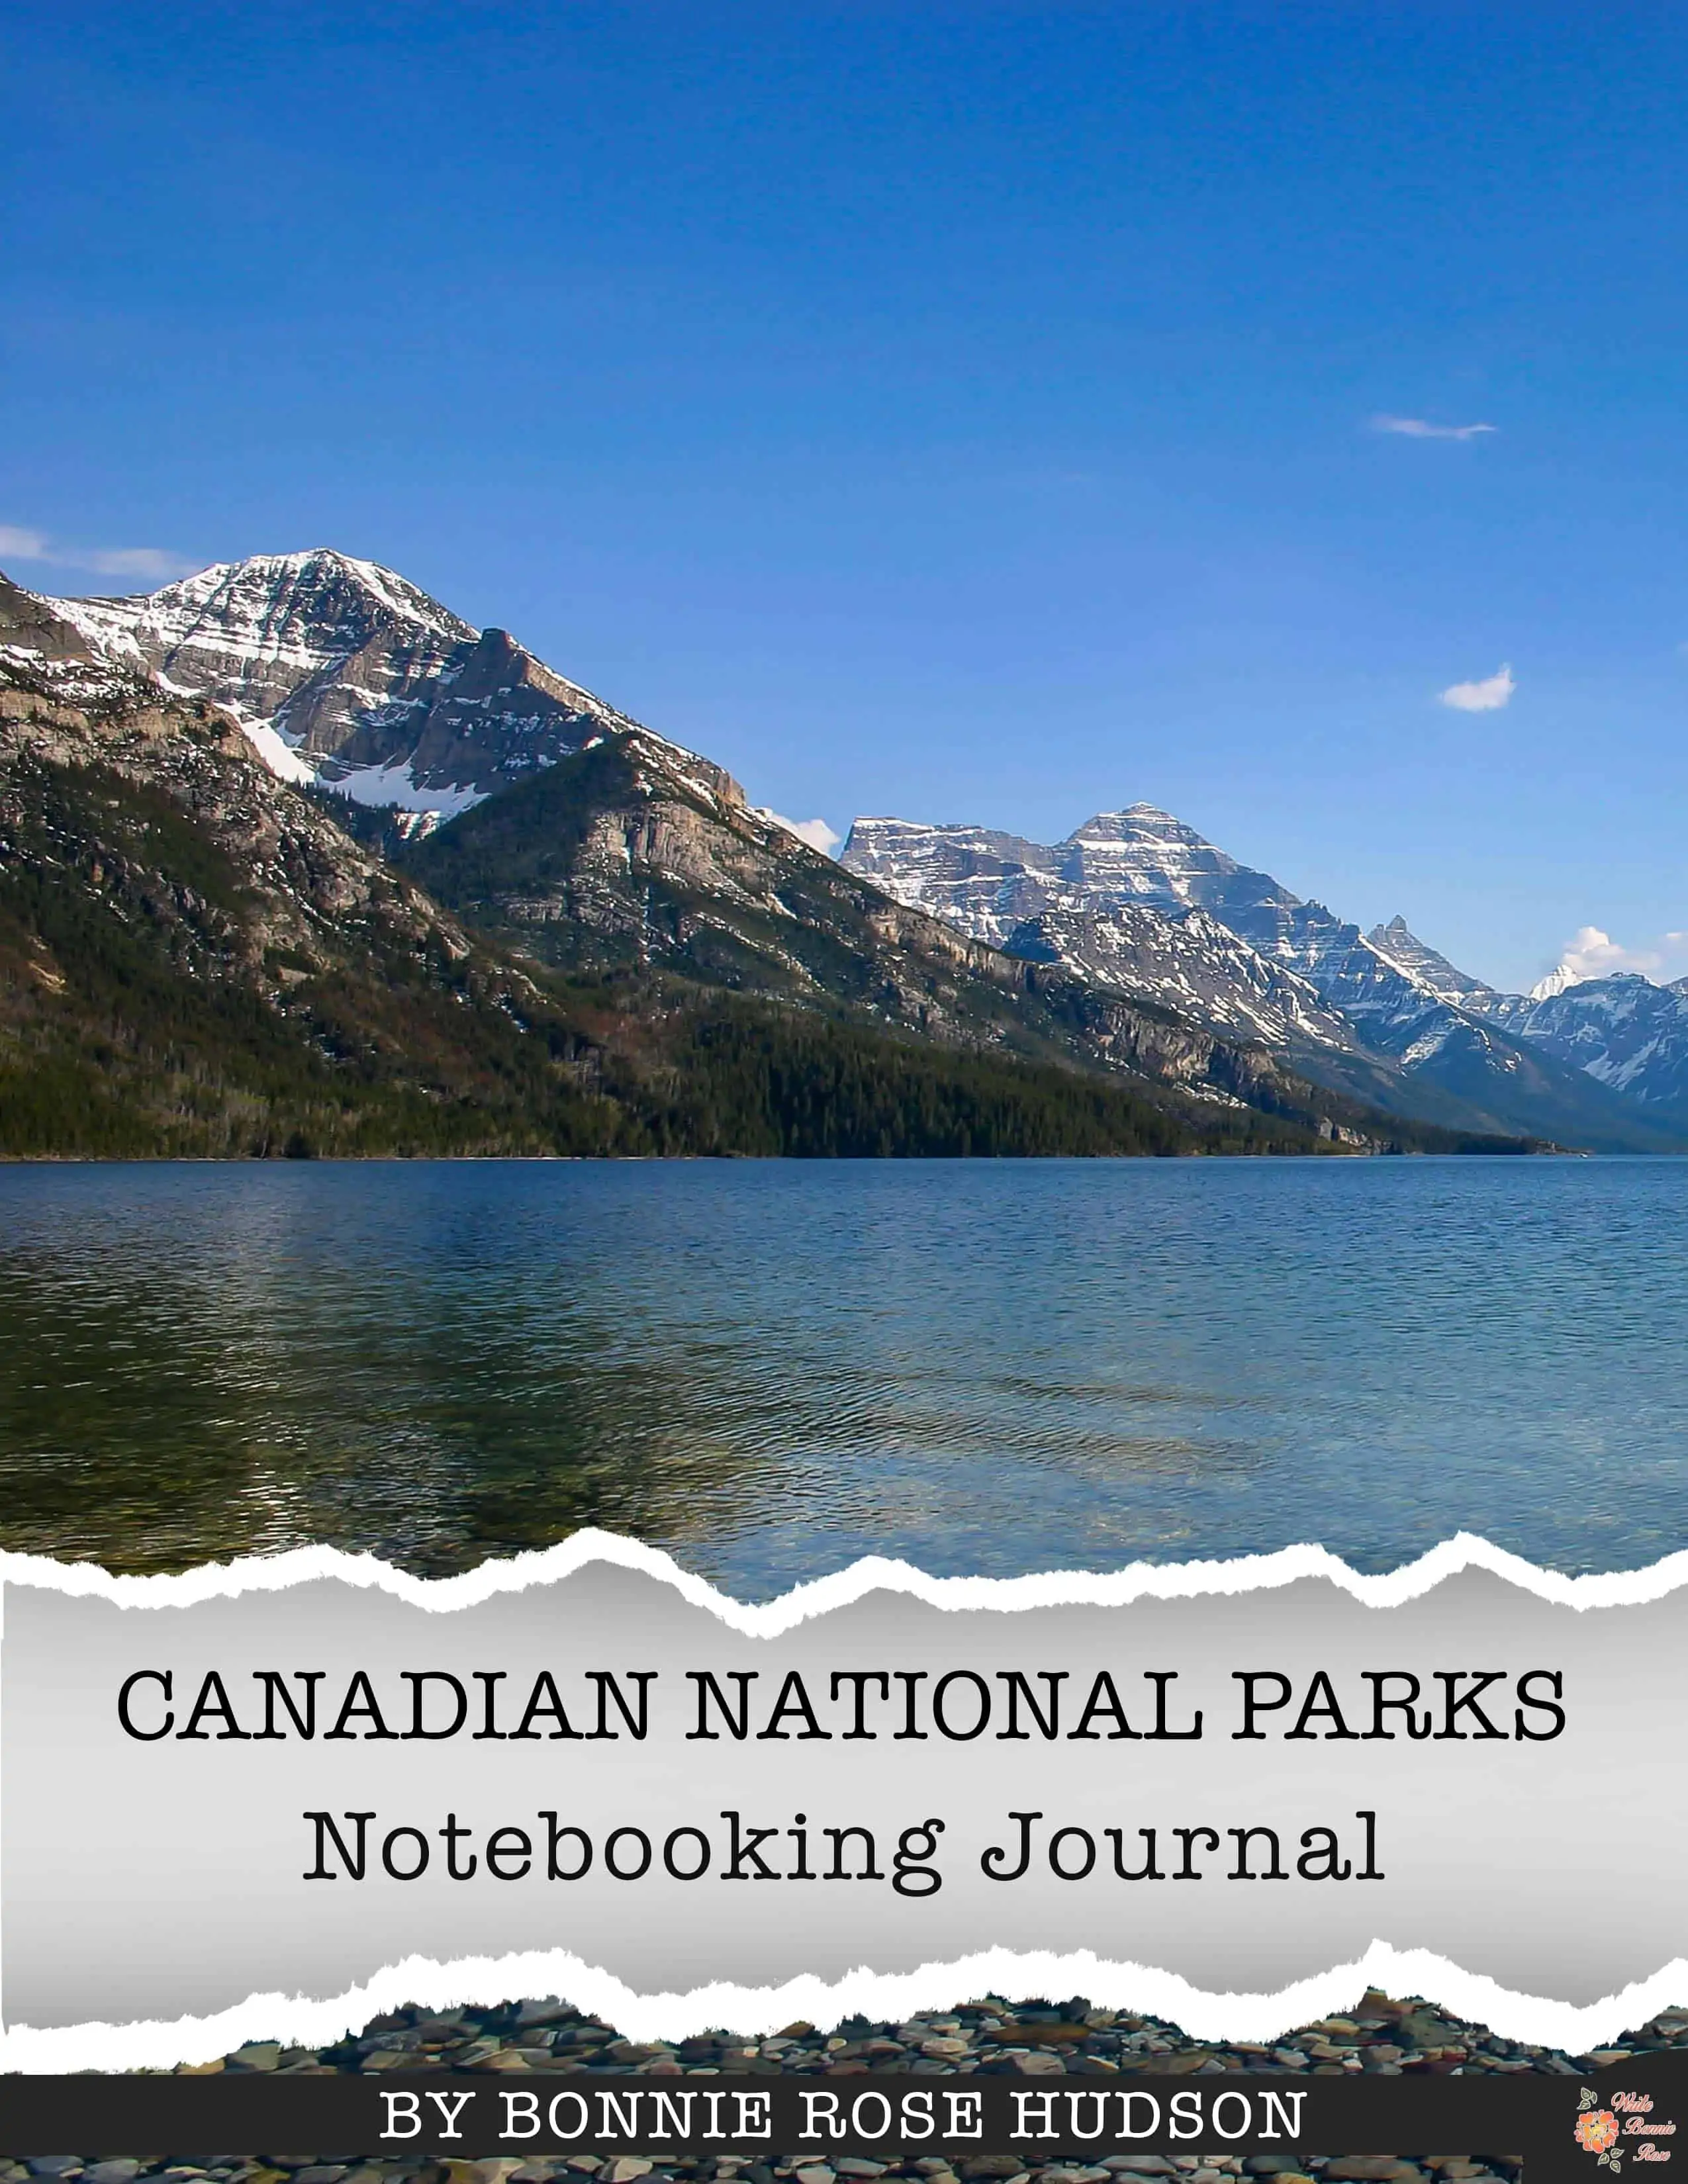 Canadian National Parks Notebooking Journal text with image of mountains and a body of water